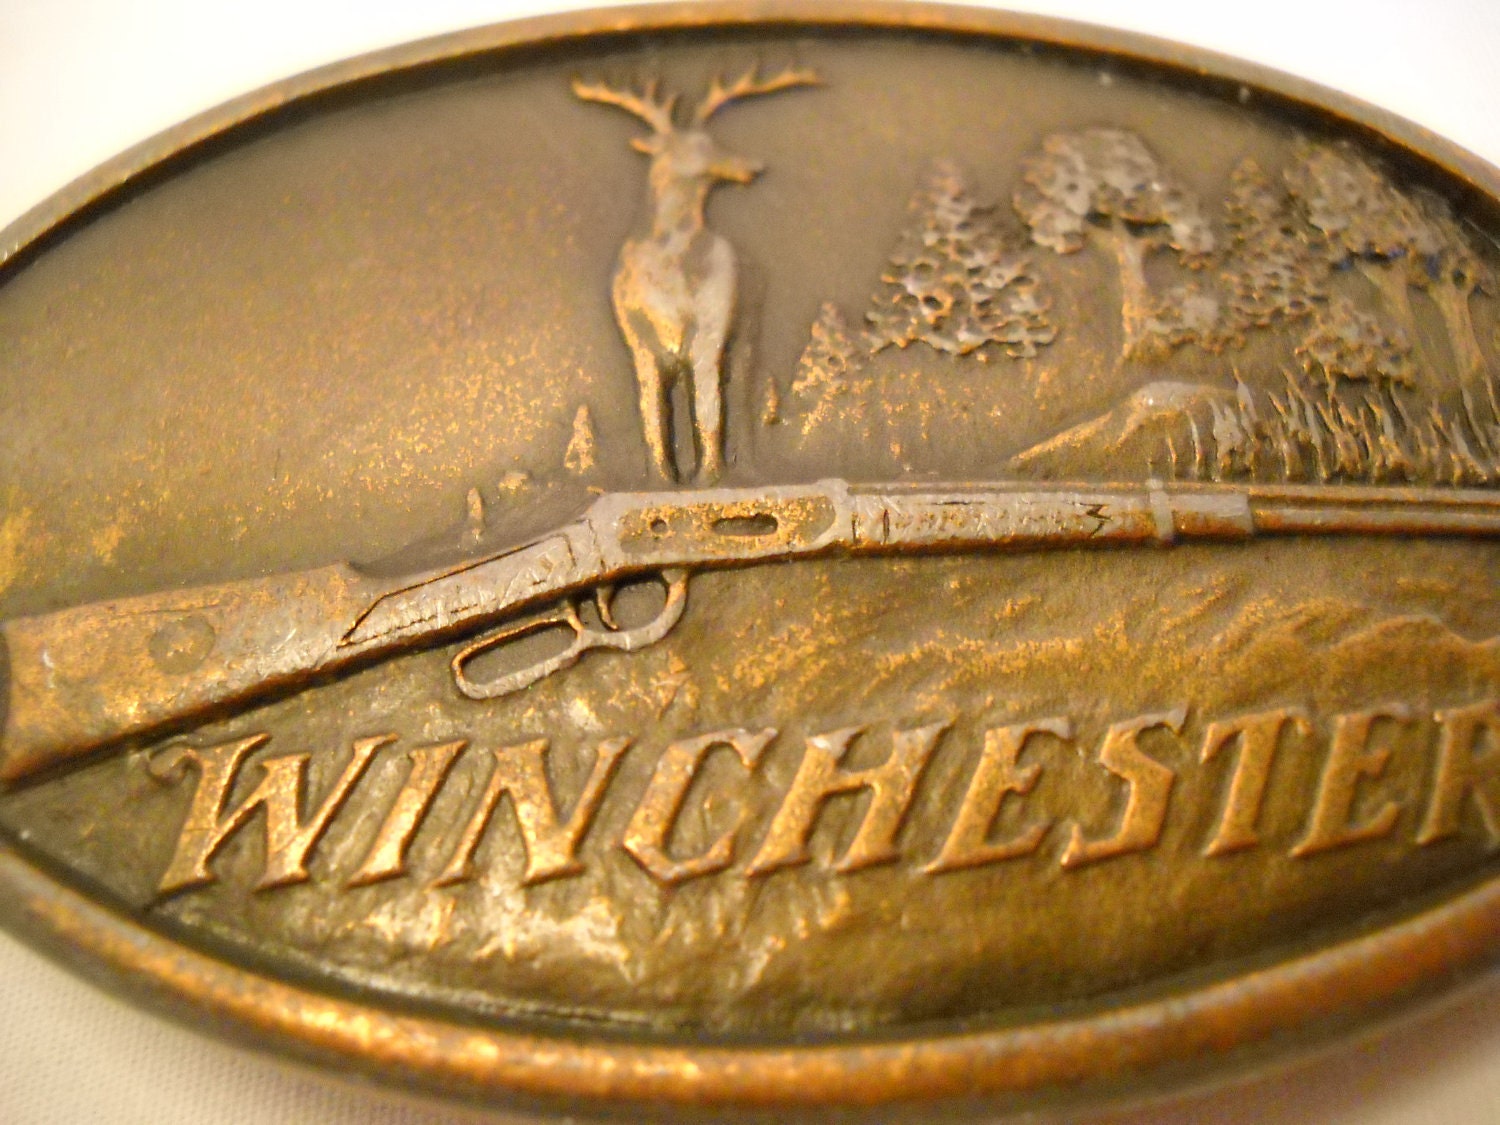 Vintage Winchester Belt Buckle By Indiana Metal Craft